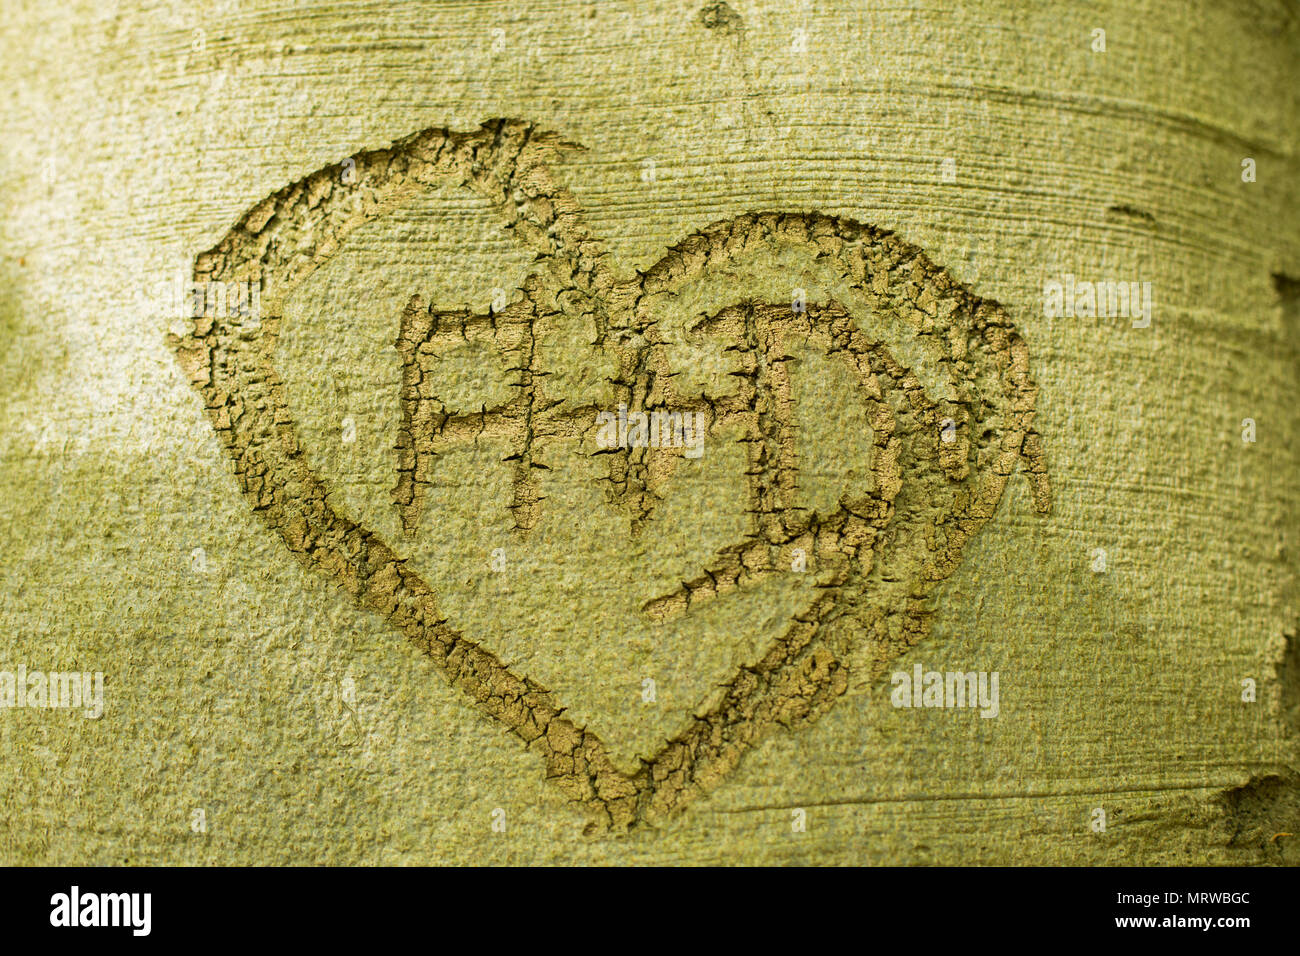 Heart carved in tree bark with letters A+D, Germany Stock Photo